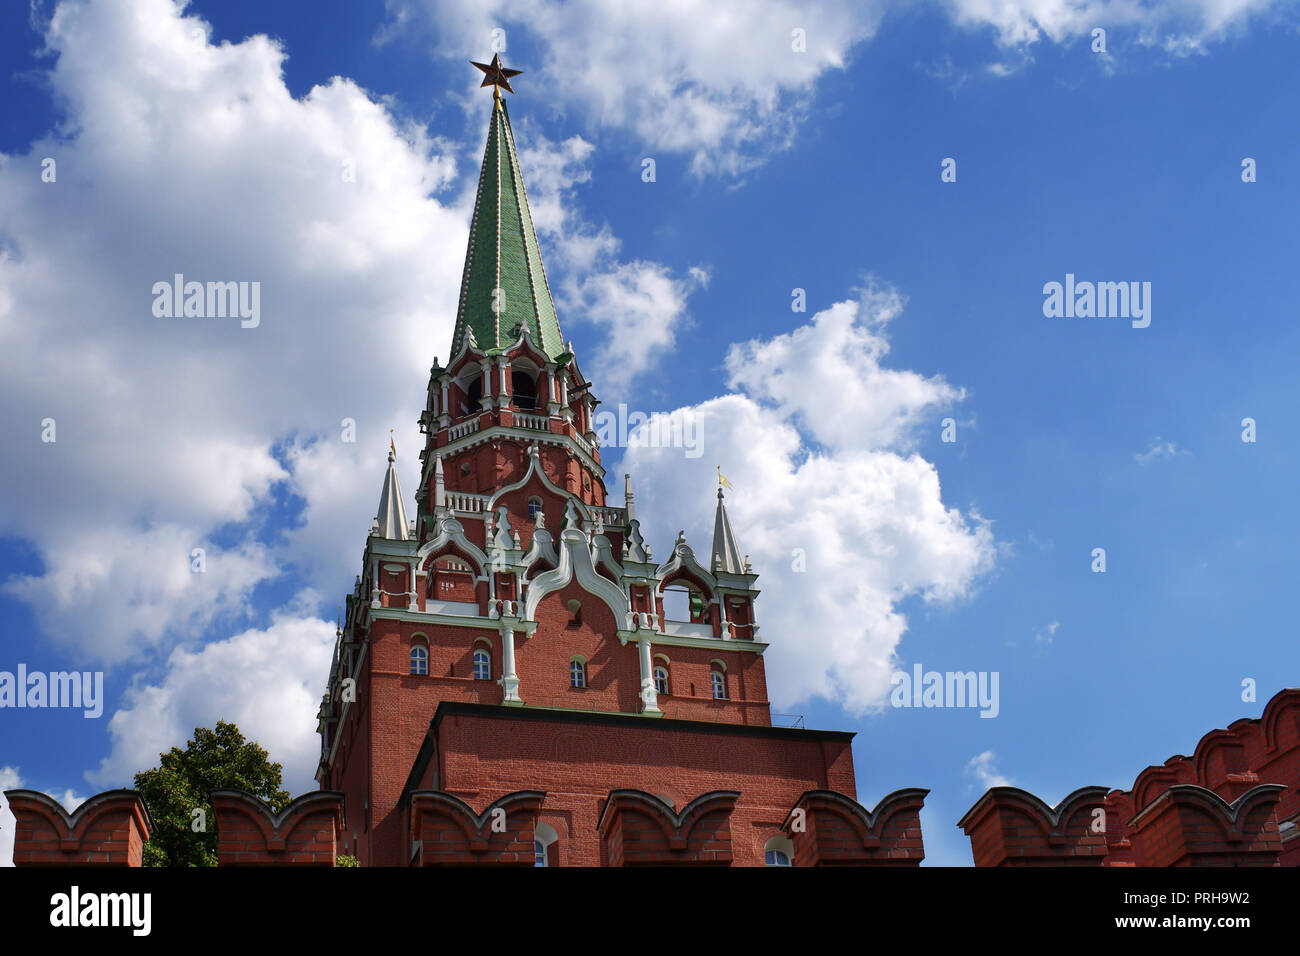 Moscow Kremlin tower, Russia Foto Stock